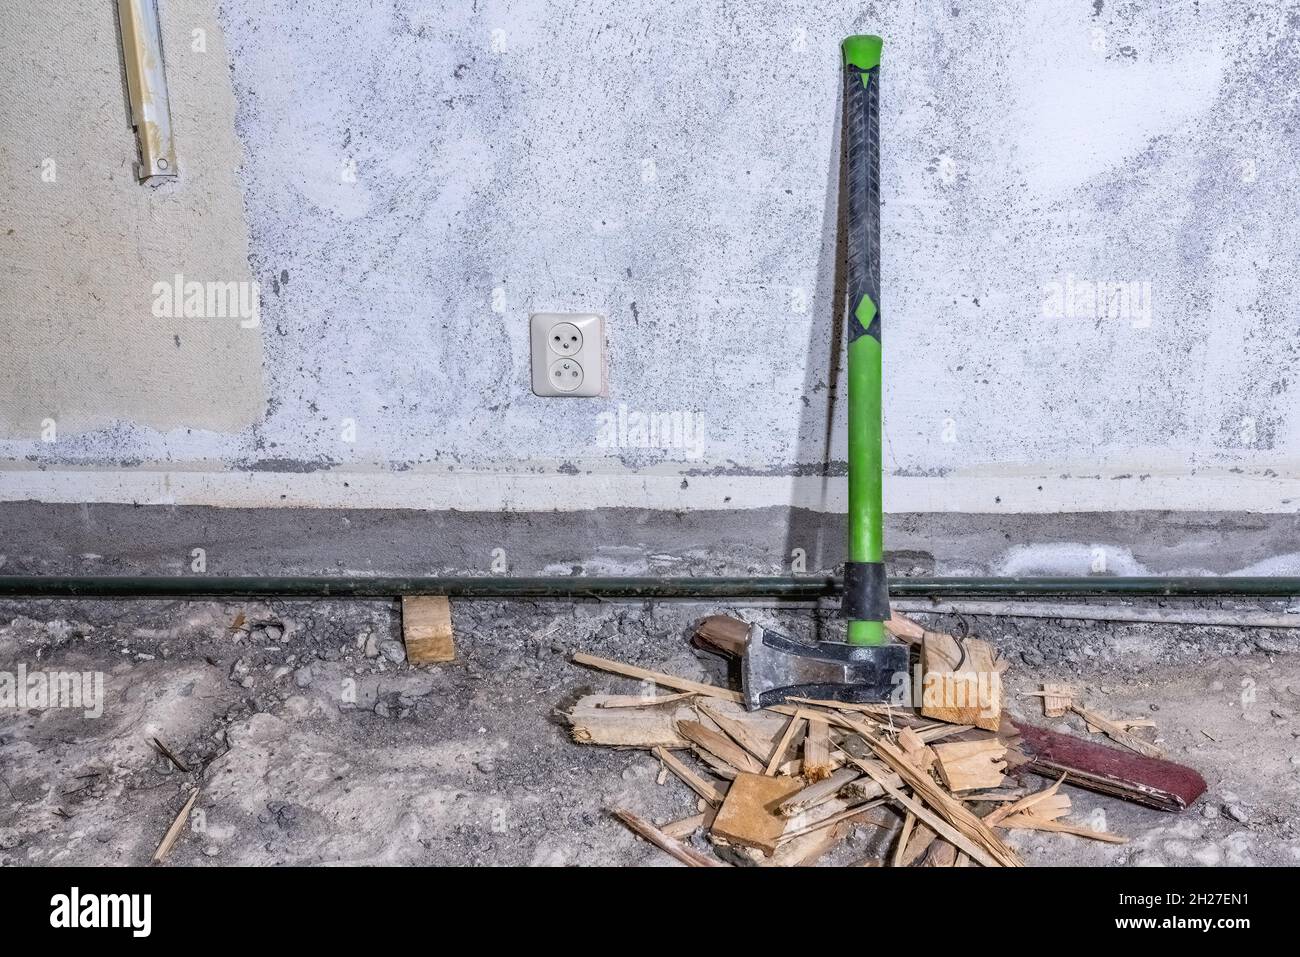 Wood splitting maul stands at concrete wall on demolished room floor, close up view, construction waste debris Stock Photo